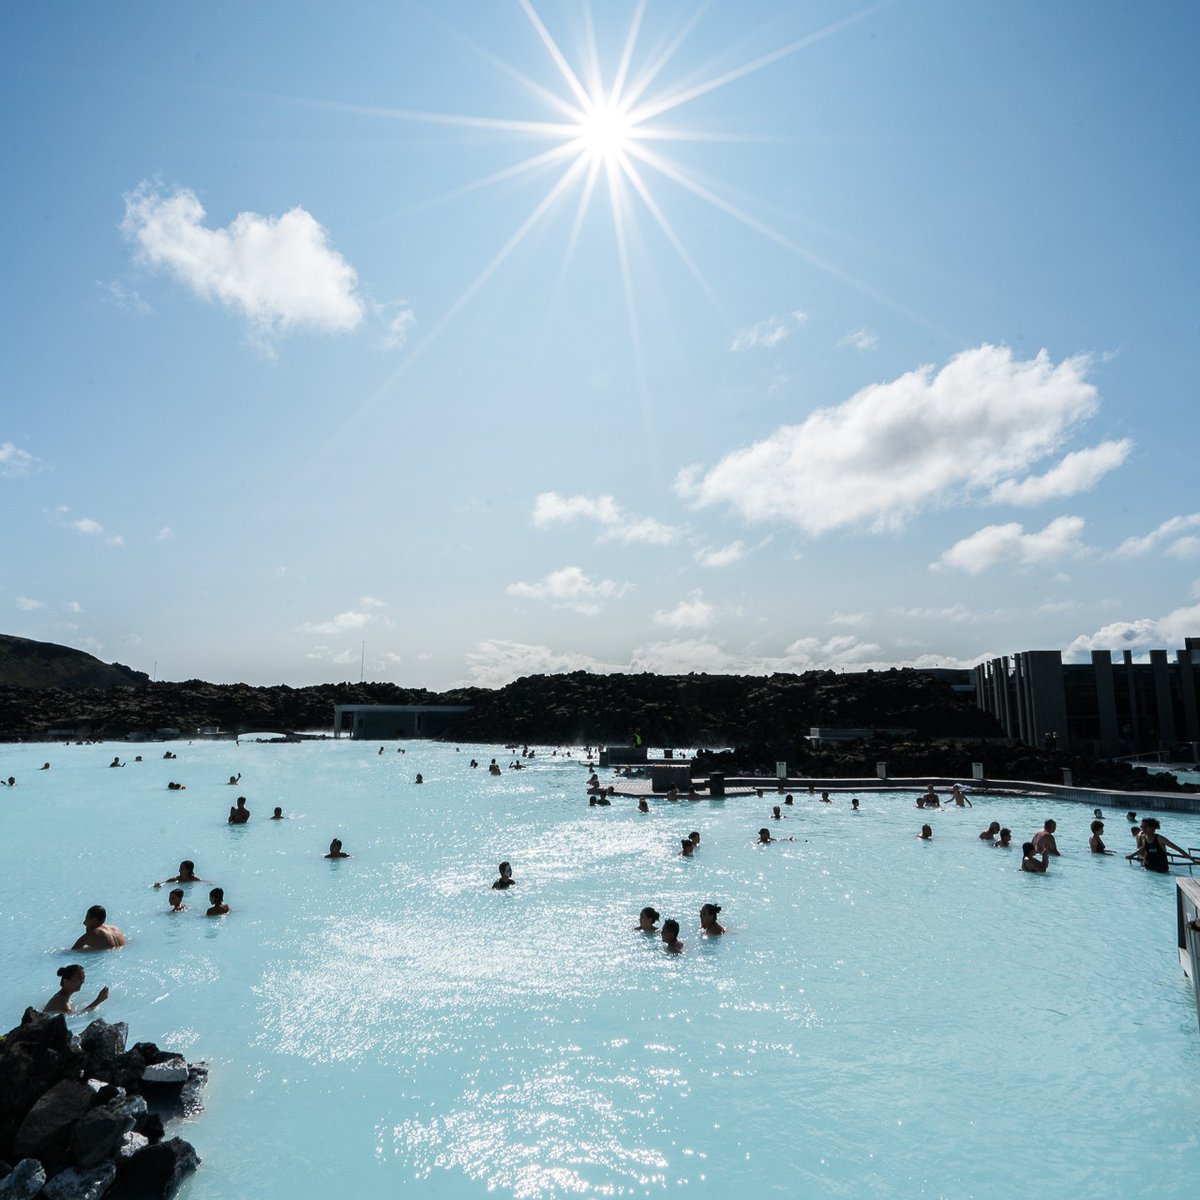 Today's a big day in Iceland! It's the official start of summer ☀️ As we bid farewell to the dark winter days, we say hello to endless daylight, (slightly) warmer temps, and the stunning midnight sun. Time to soak up the season 💙 #BlueLagoonIceland #Iceland